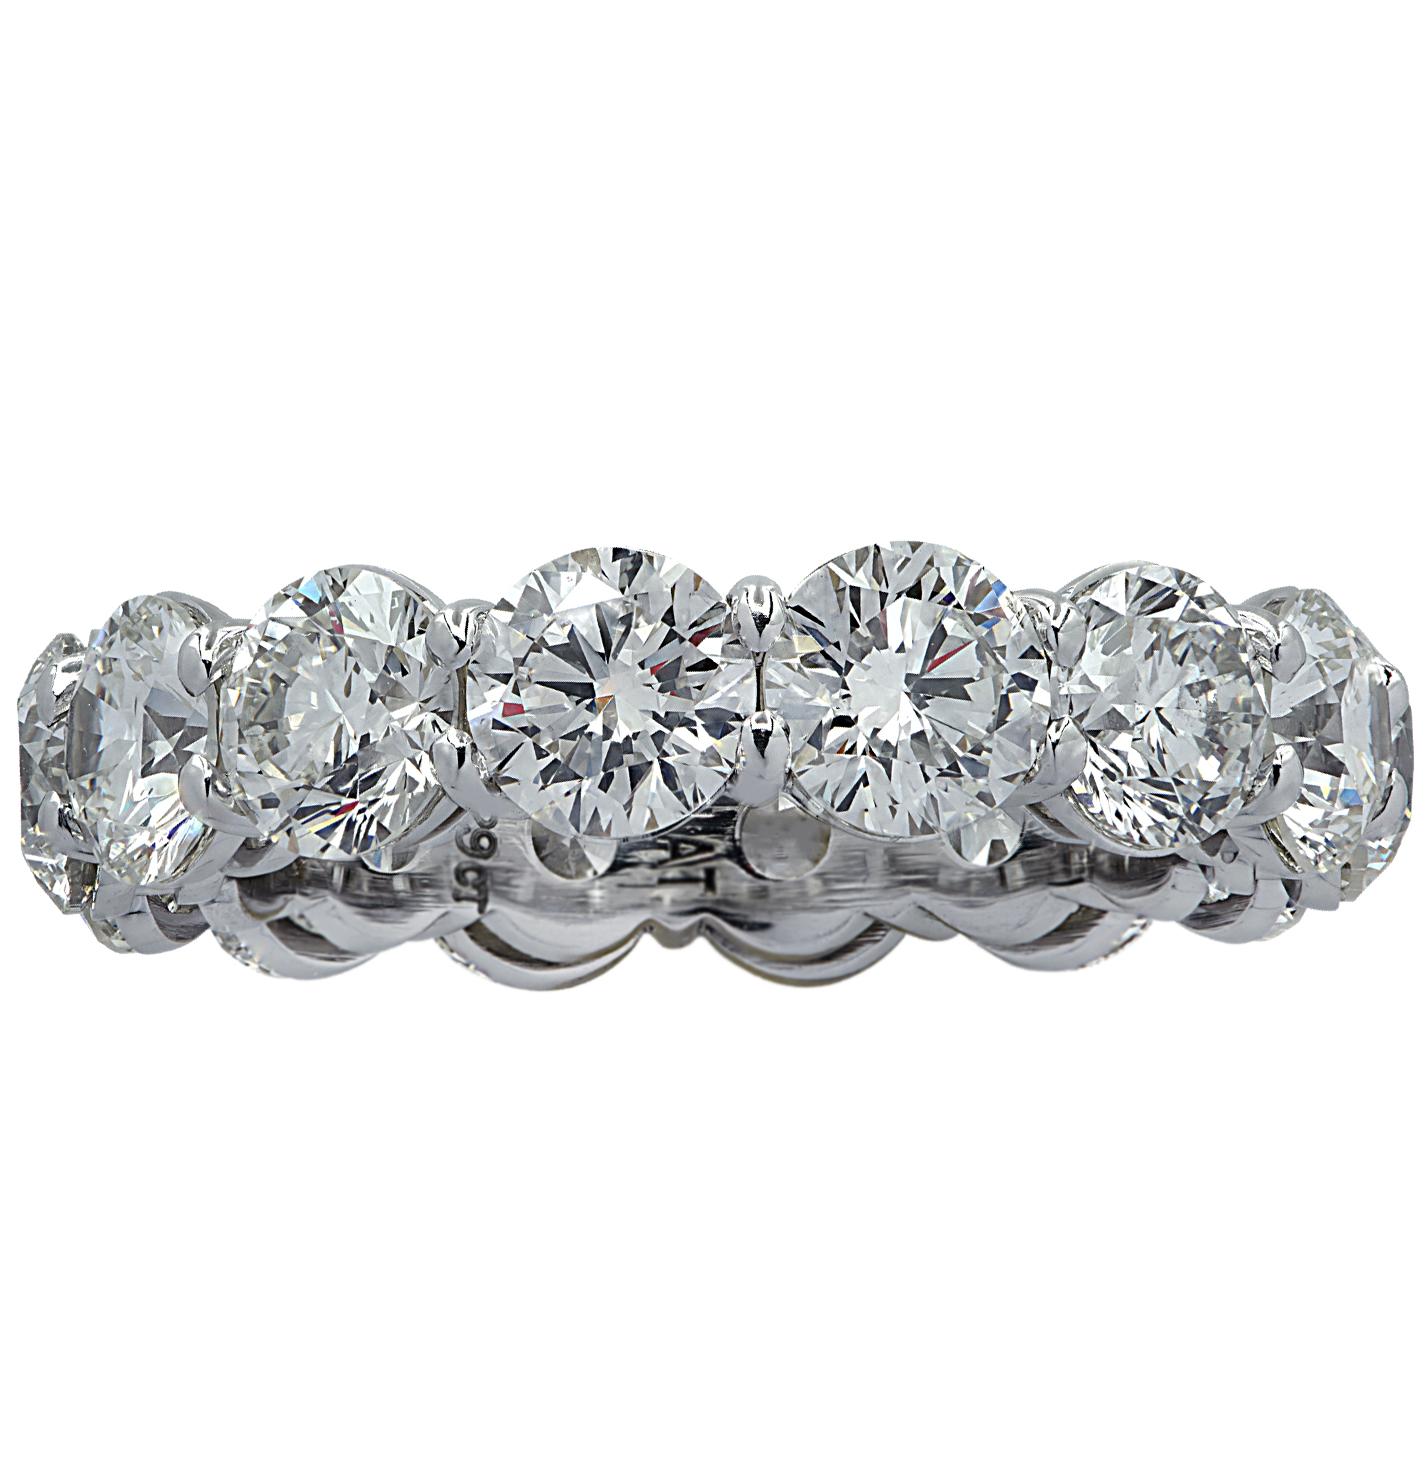 Exquisite Vivid Diamonds eternity band crafted in Platinum, showcasing 14 stunning round brilliant cut diamonds weighing 7.29 carats total, I-J color, VS-SI clarity. Each diamond was carefully selected, perfectly matched and set in a seamless sea of